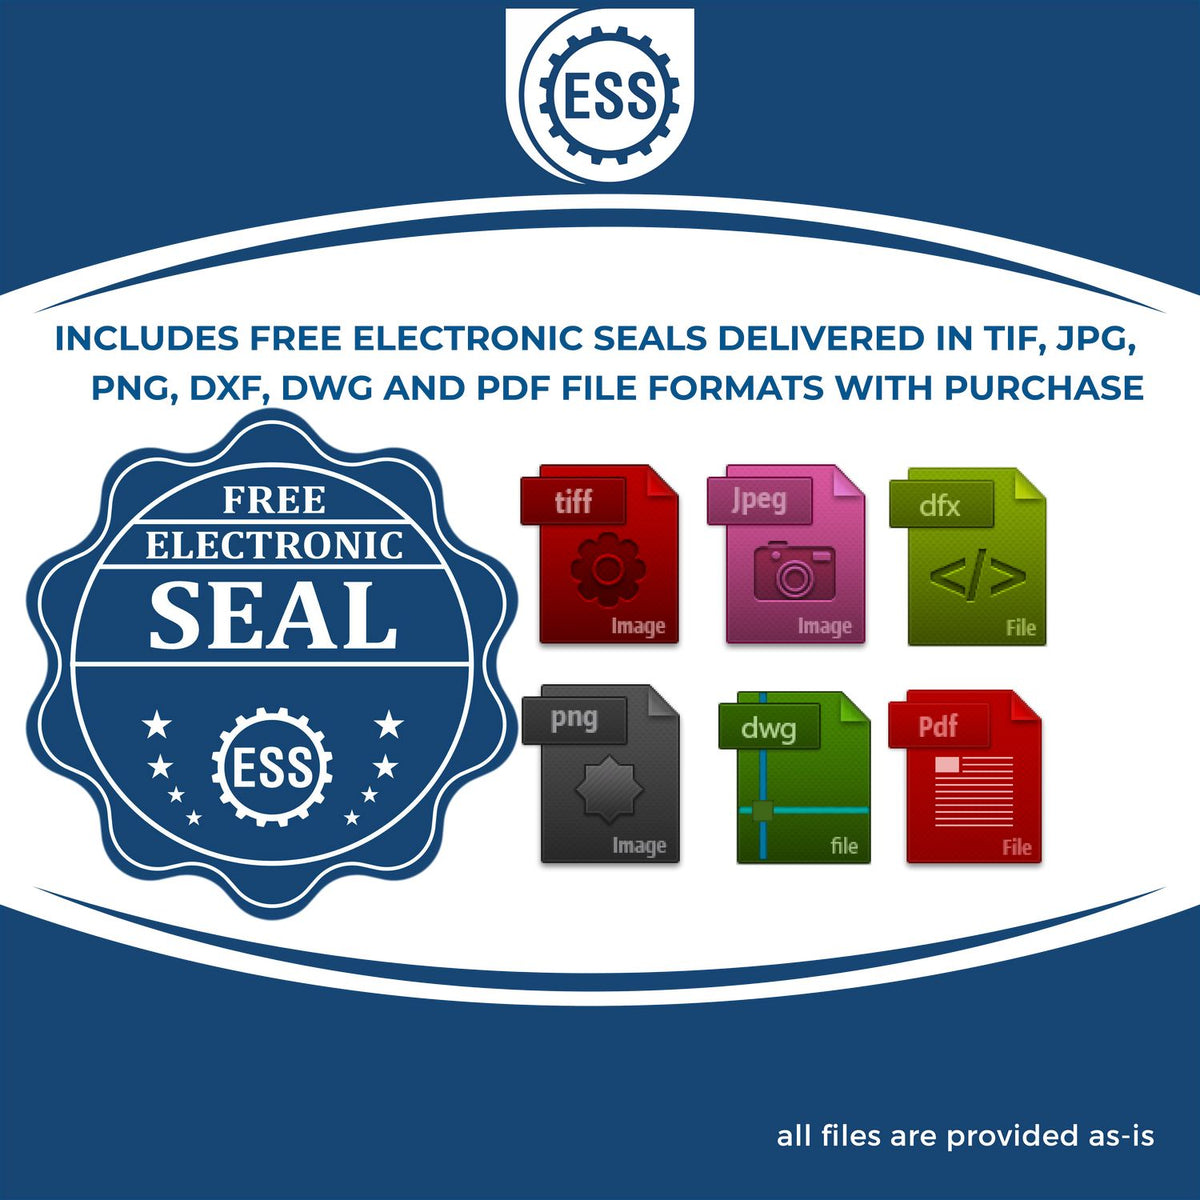 An infographic for the free electronic seal for the Connecticut Engineer Desk Seal illustrating the different file type icons such as DXF, DWG, TIF, JPG and PNG.